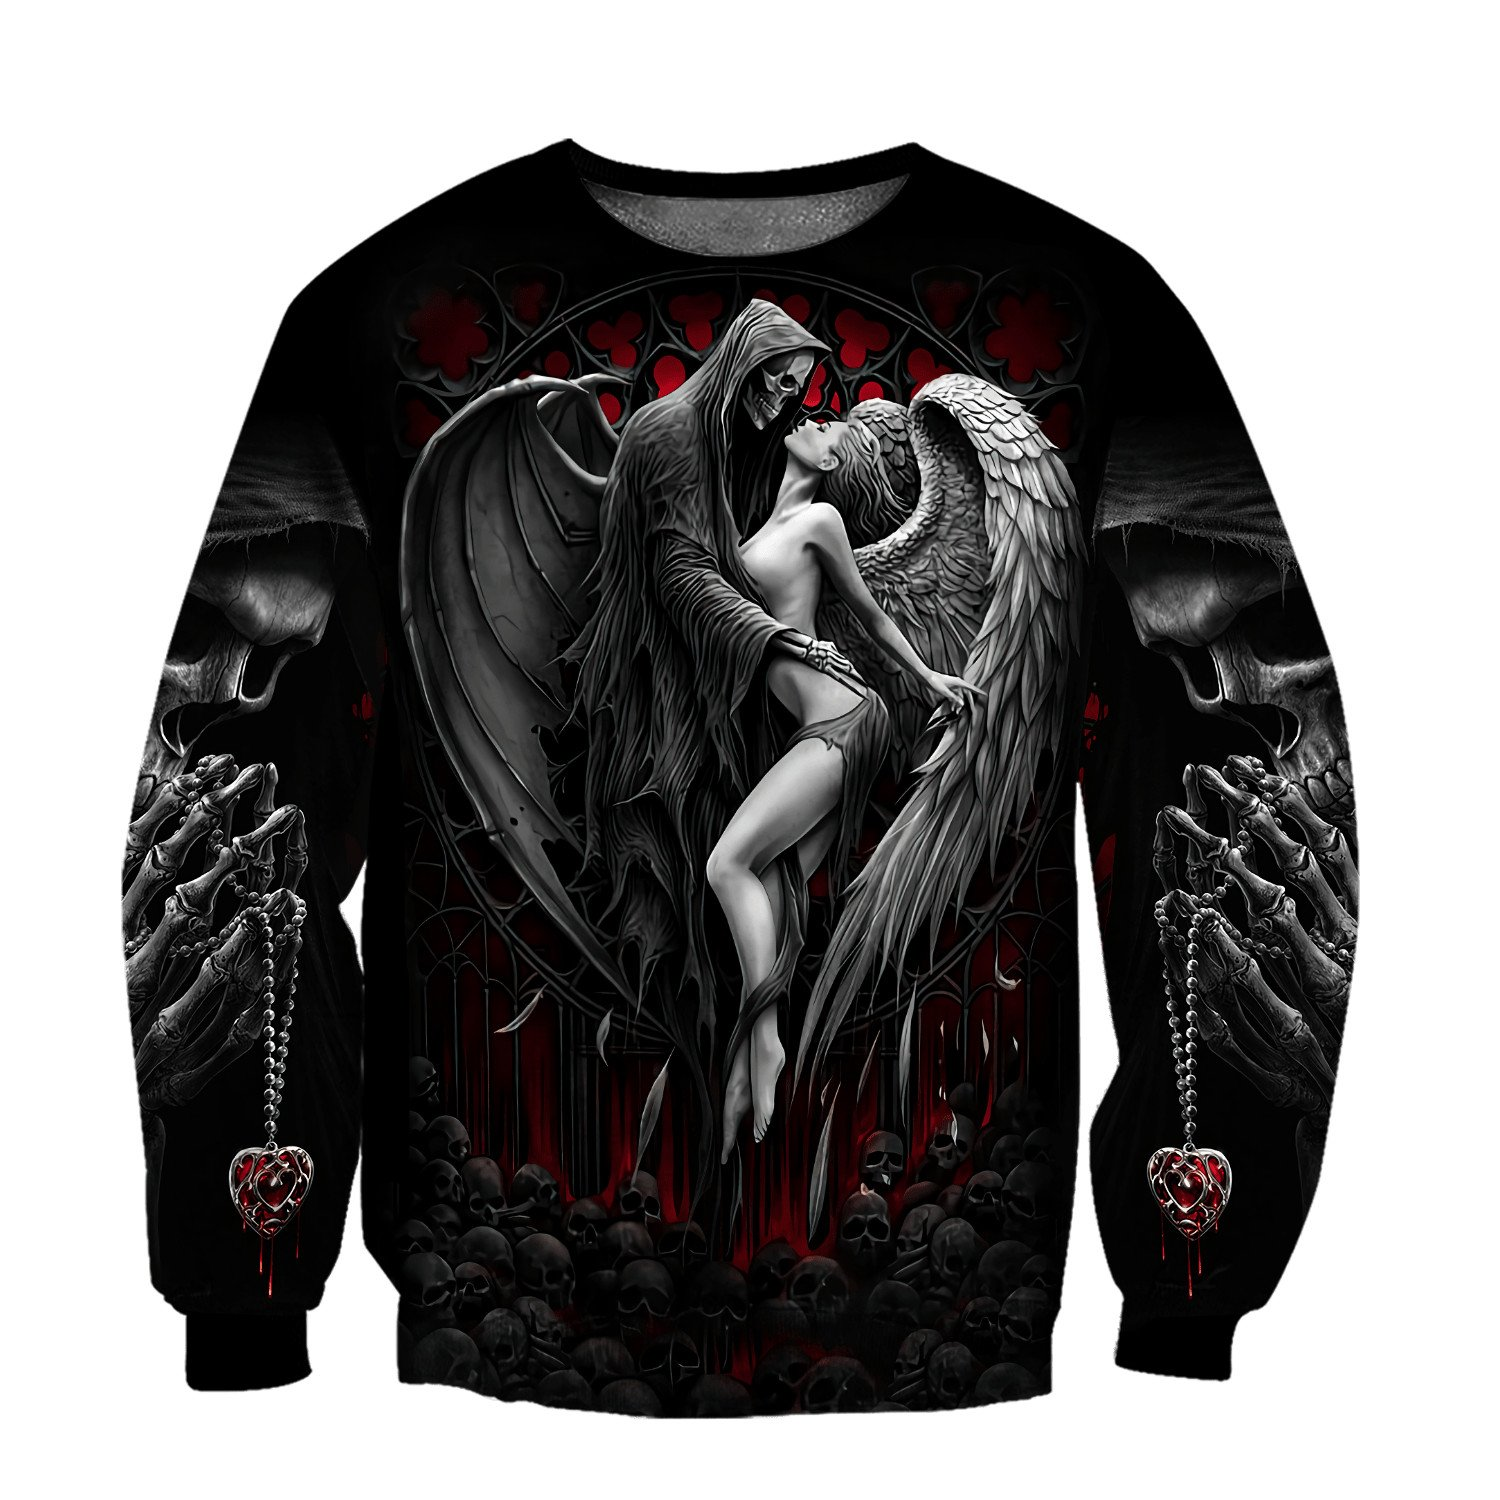 Reaper Skull Angel And Demon 3D Printed Sweatshirt / Gothic Style Clothing for Men - HARD'N'HEAVY